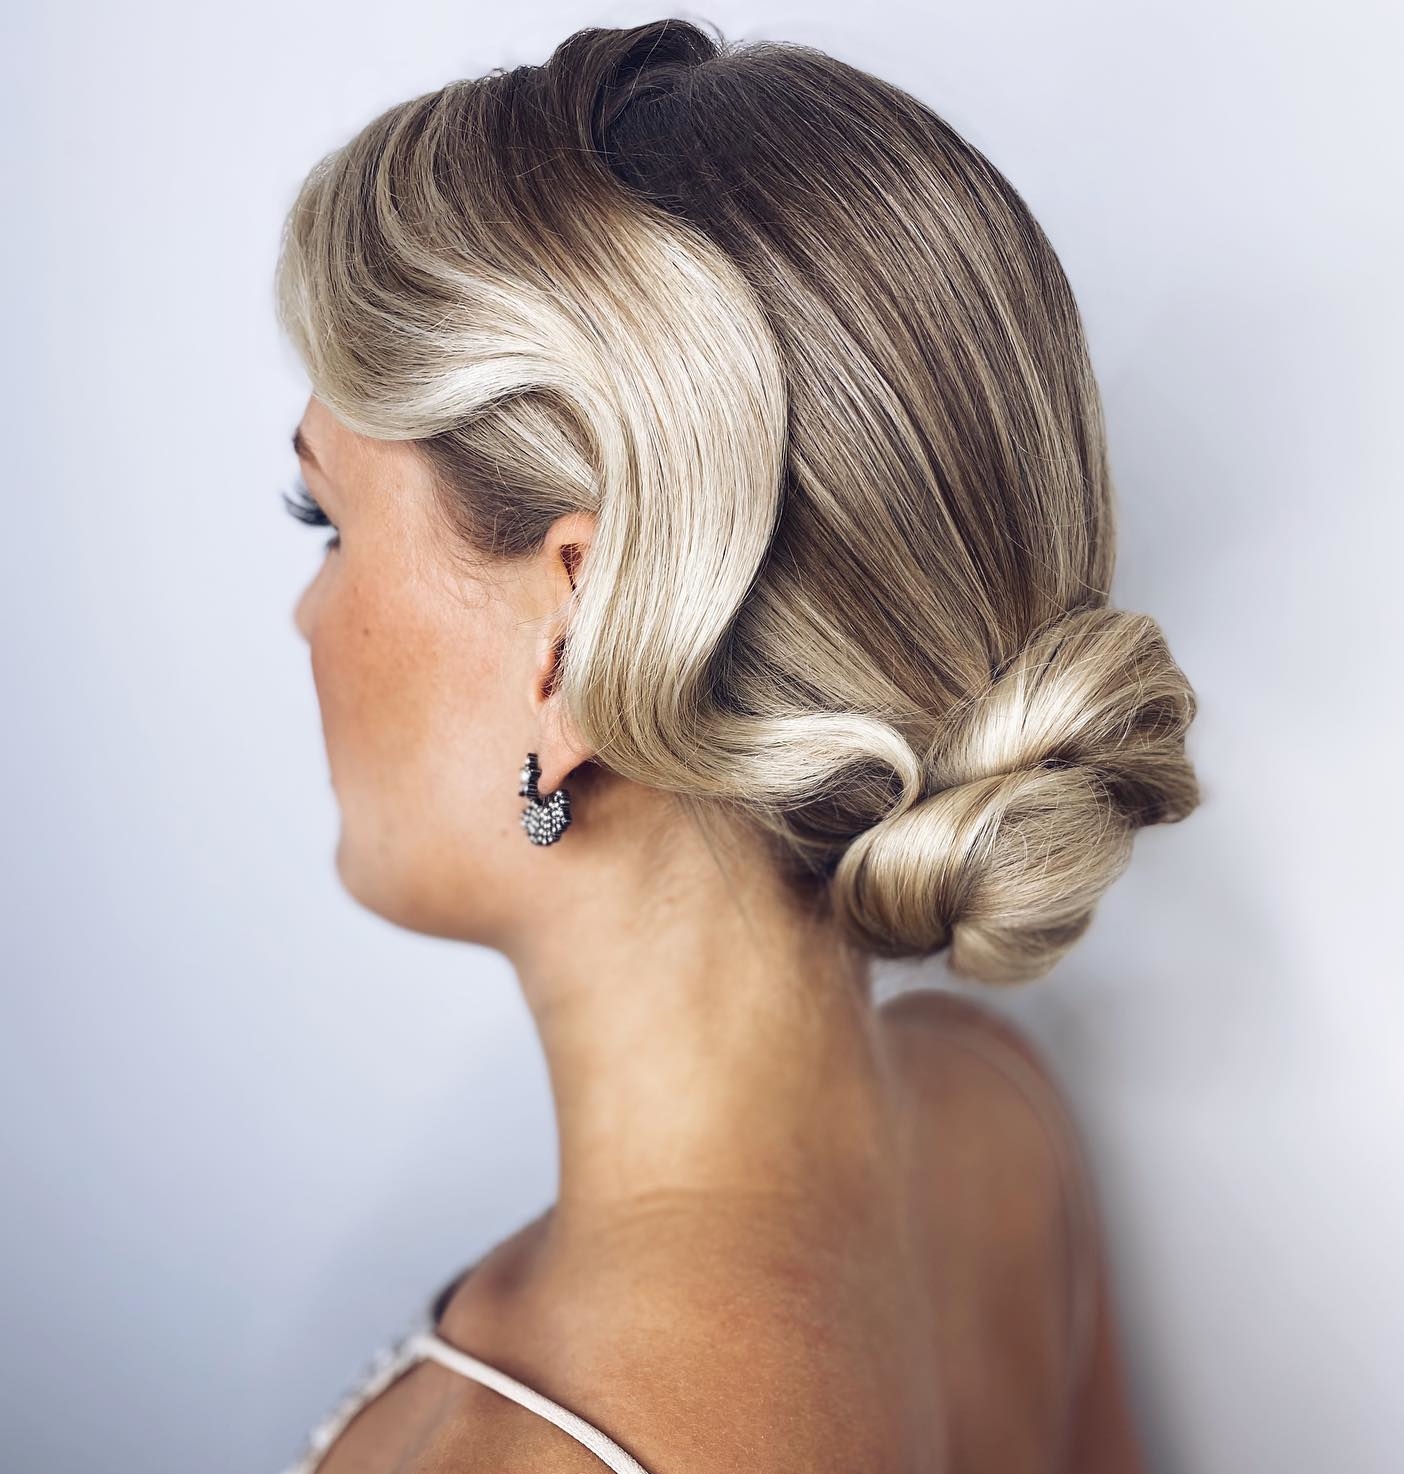 Vintage Wedding Hairstyle with Bun and Wavy Side Strand